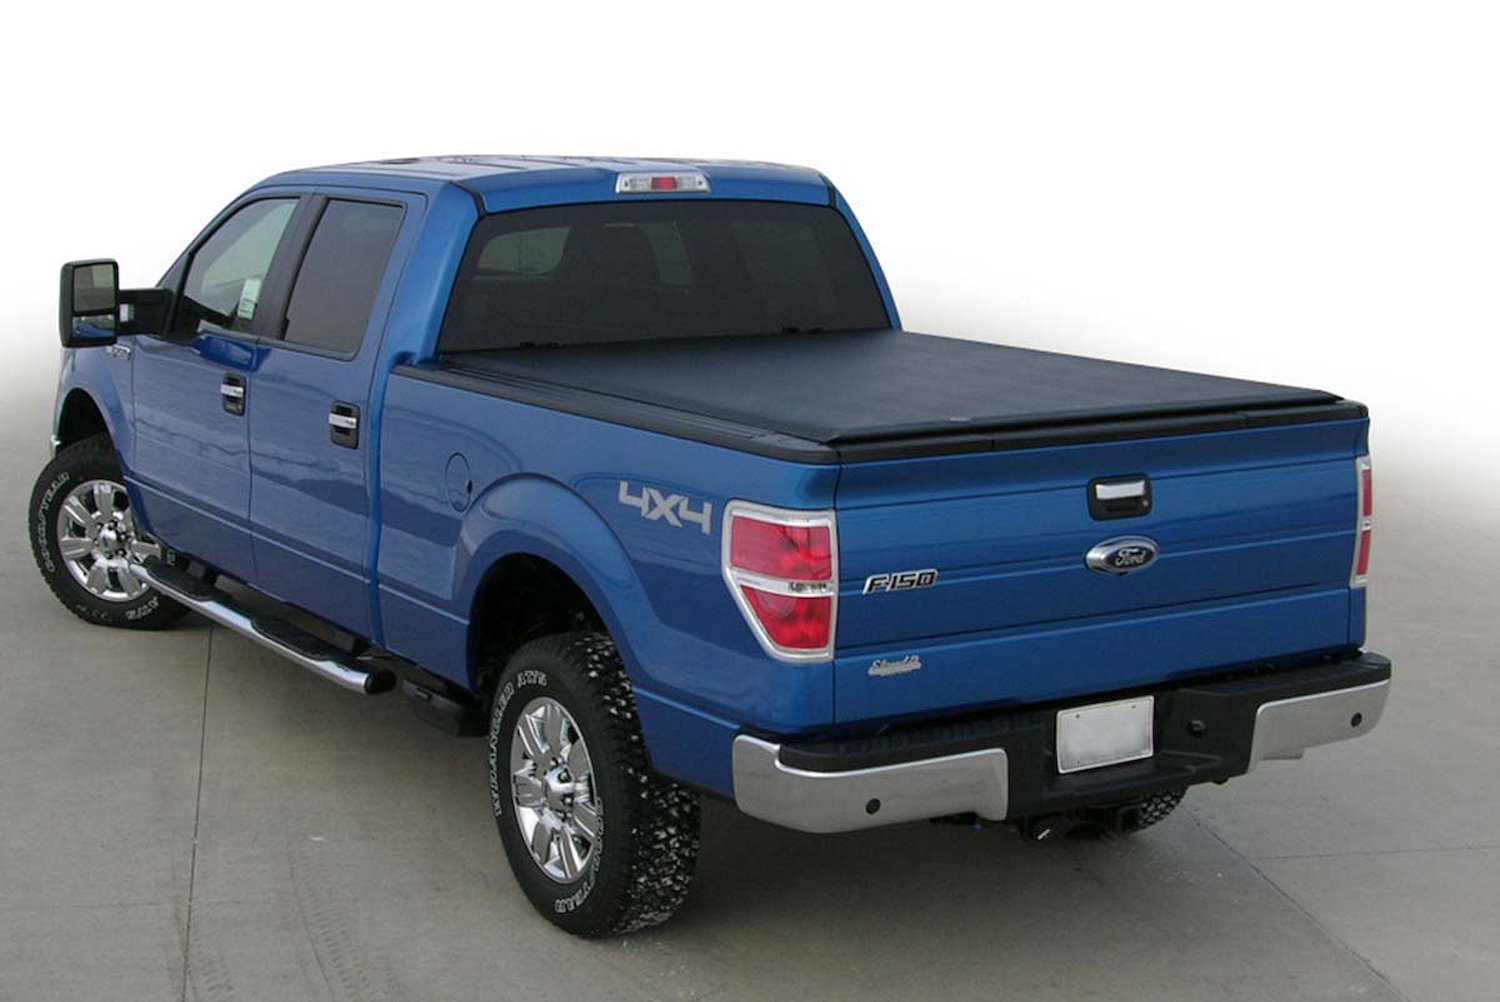 LORADO Roll-Up Tonneau Cover, 2017-2022 Ford F-250/F-350, with 6 ft. 8 in. Bed